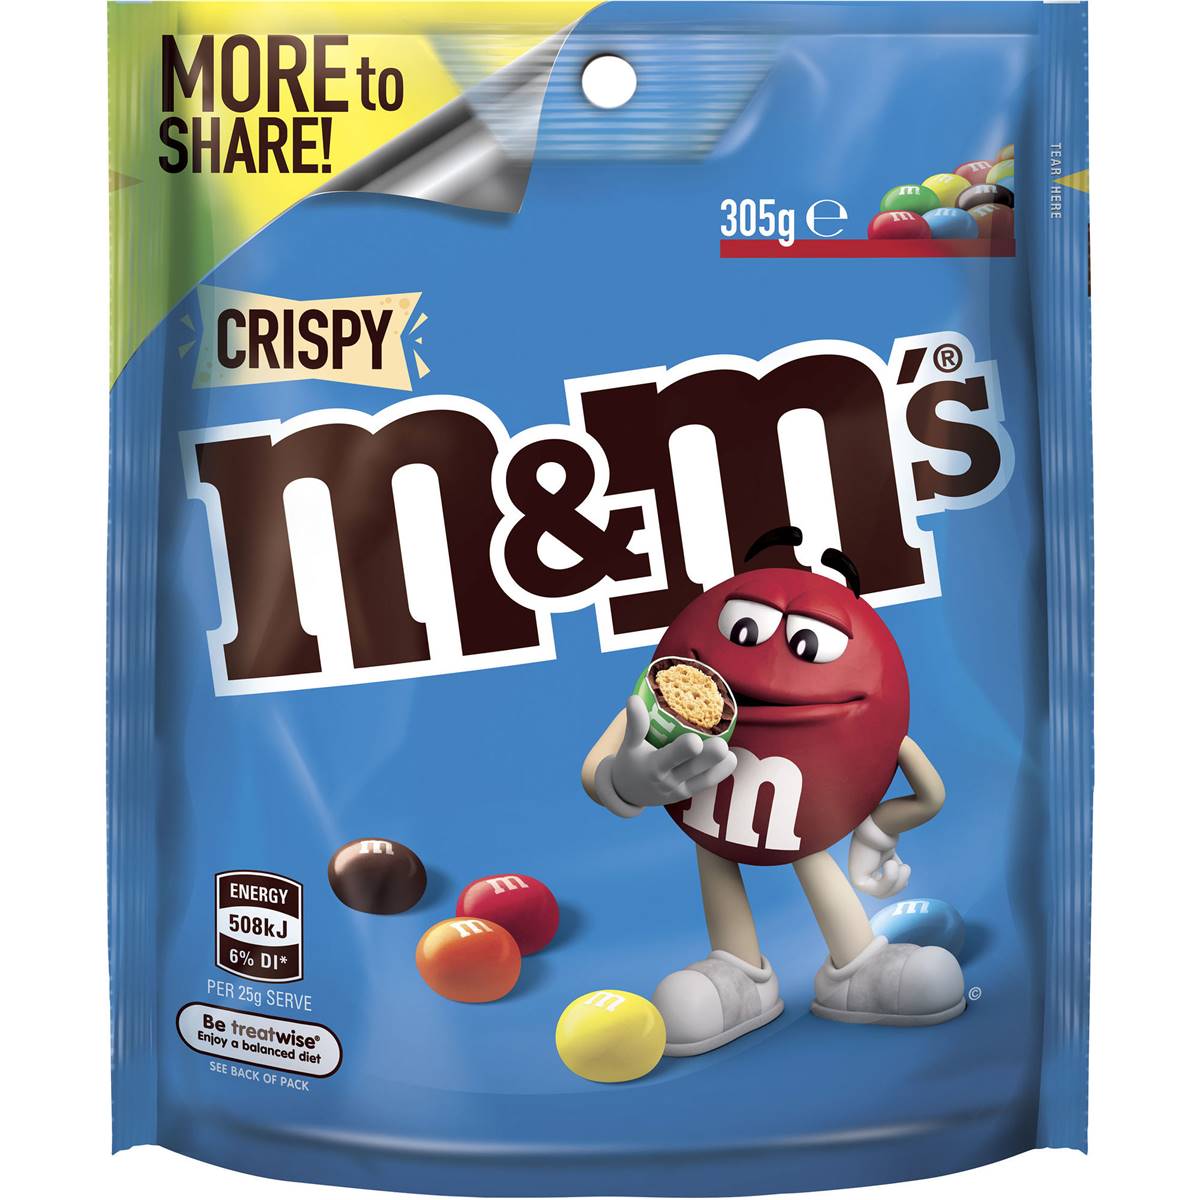 485 calories in M&m's Crispy Chocolate Large Bag (100g) calcount